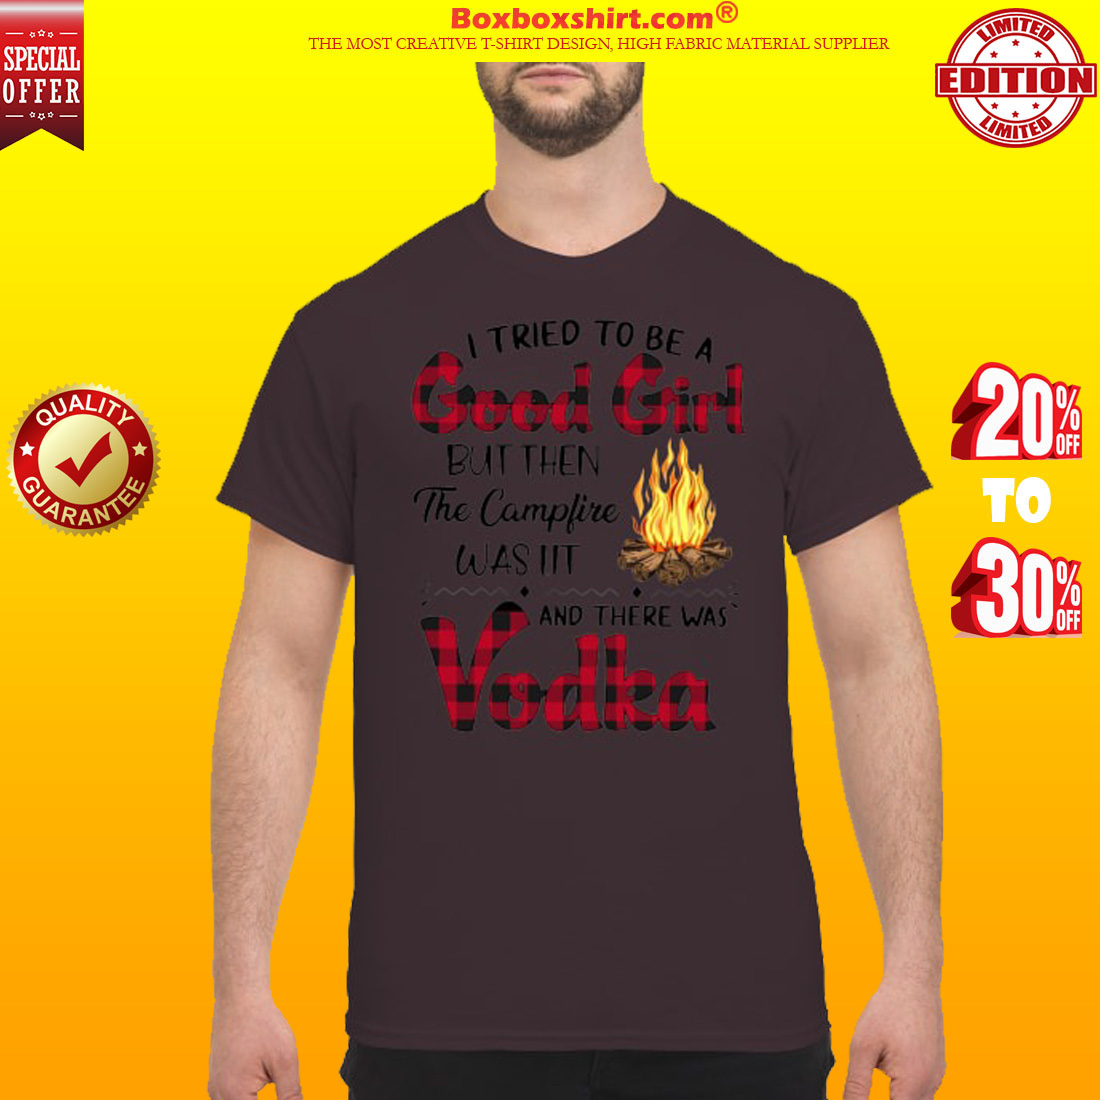 I tried to be a good girl but then the campfire was lit and there was Vodka classic shirt